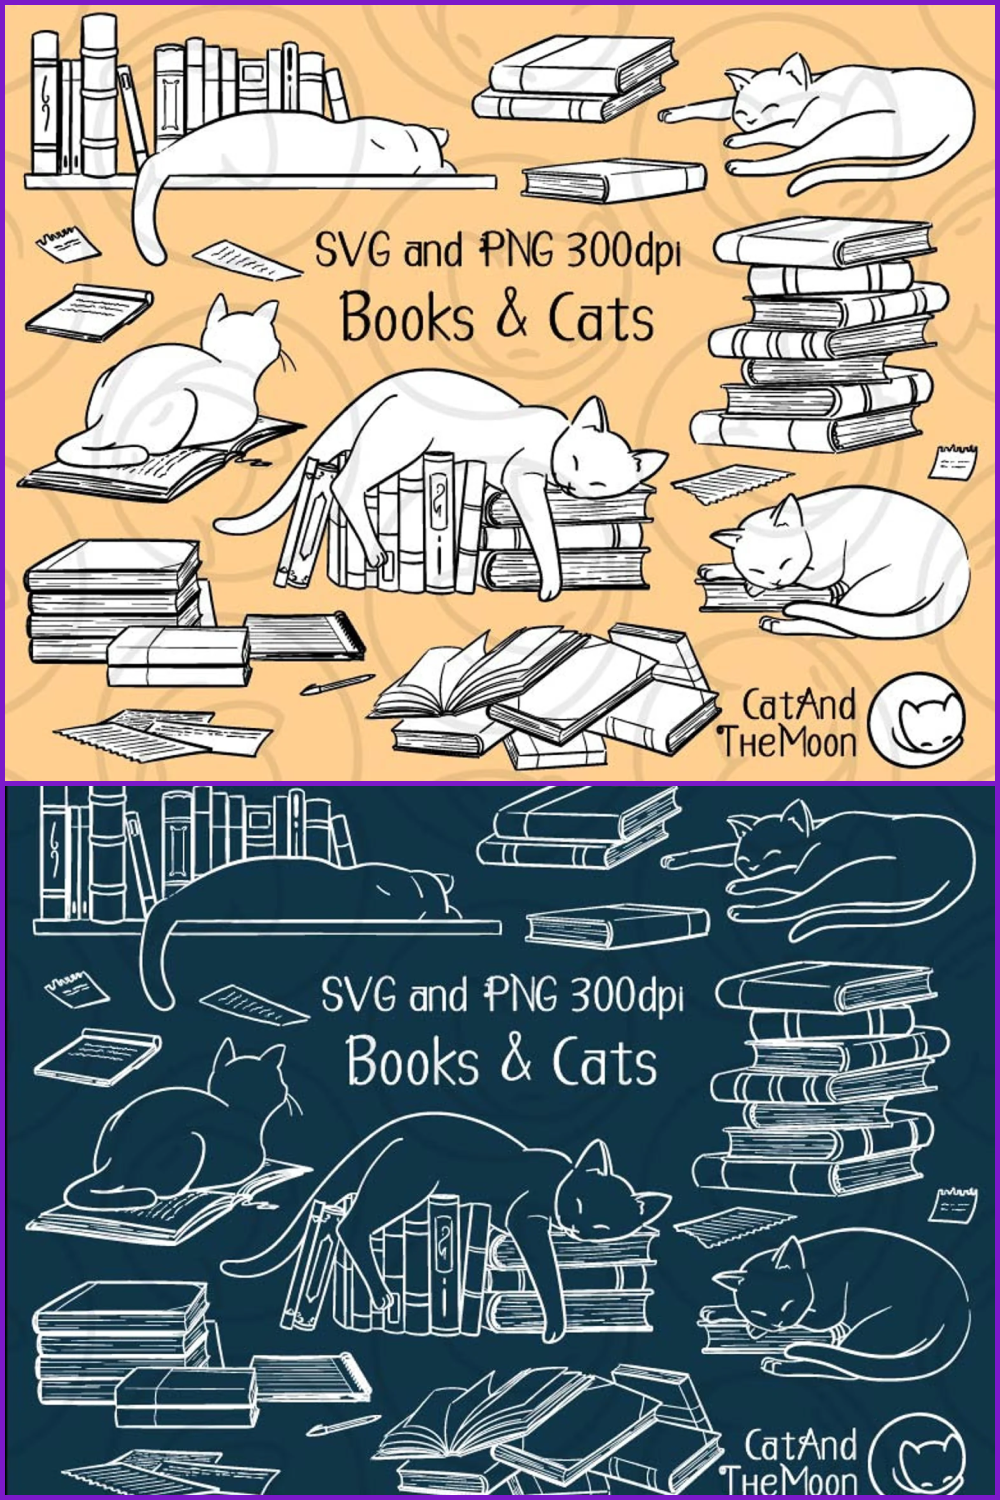 Collage with sketches of black and white books in a stack and open with cats on them.